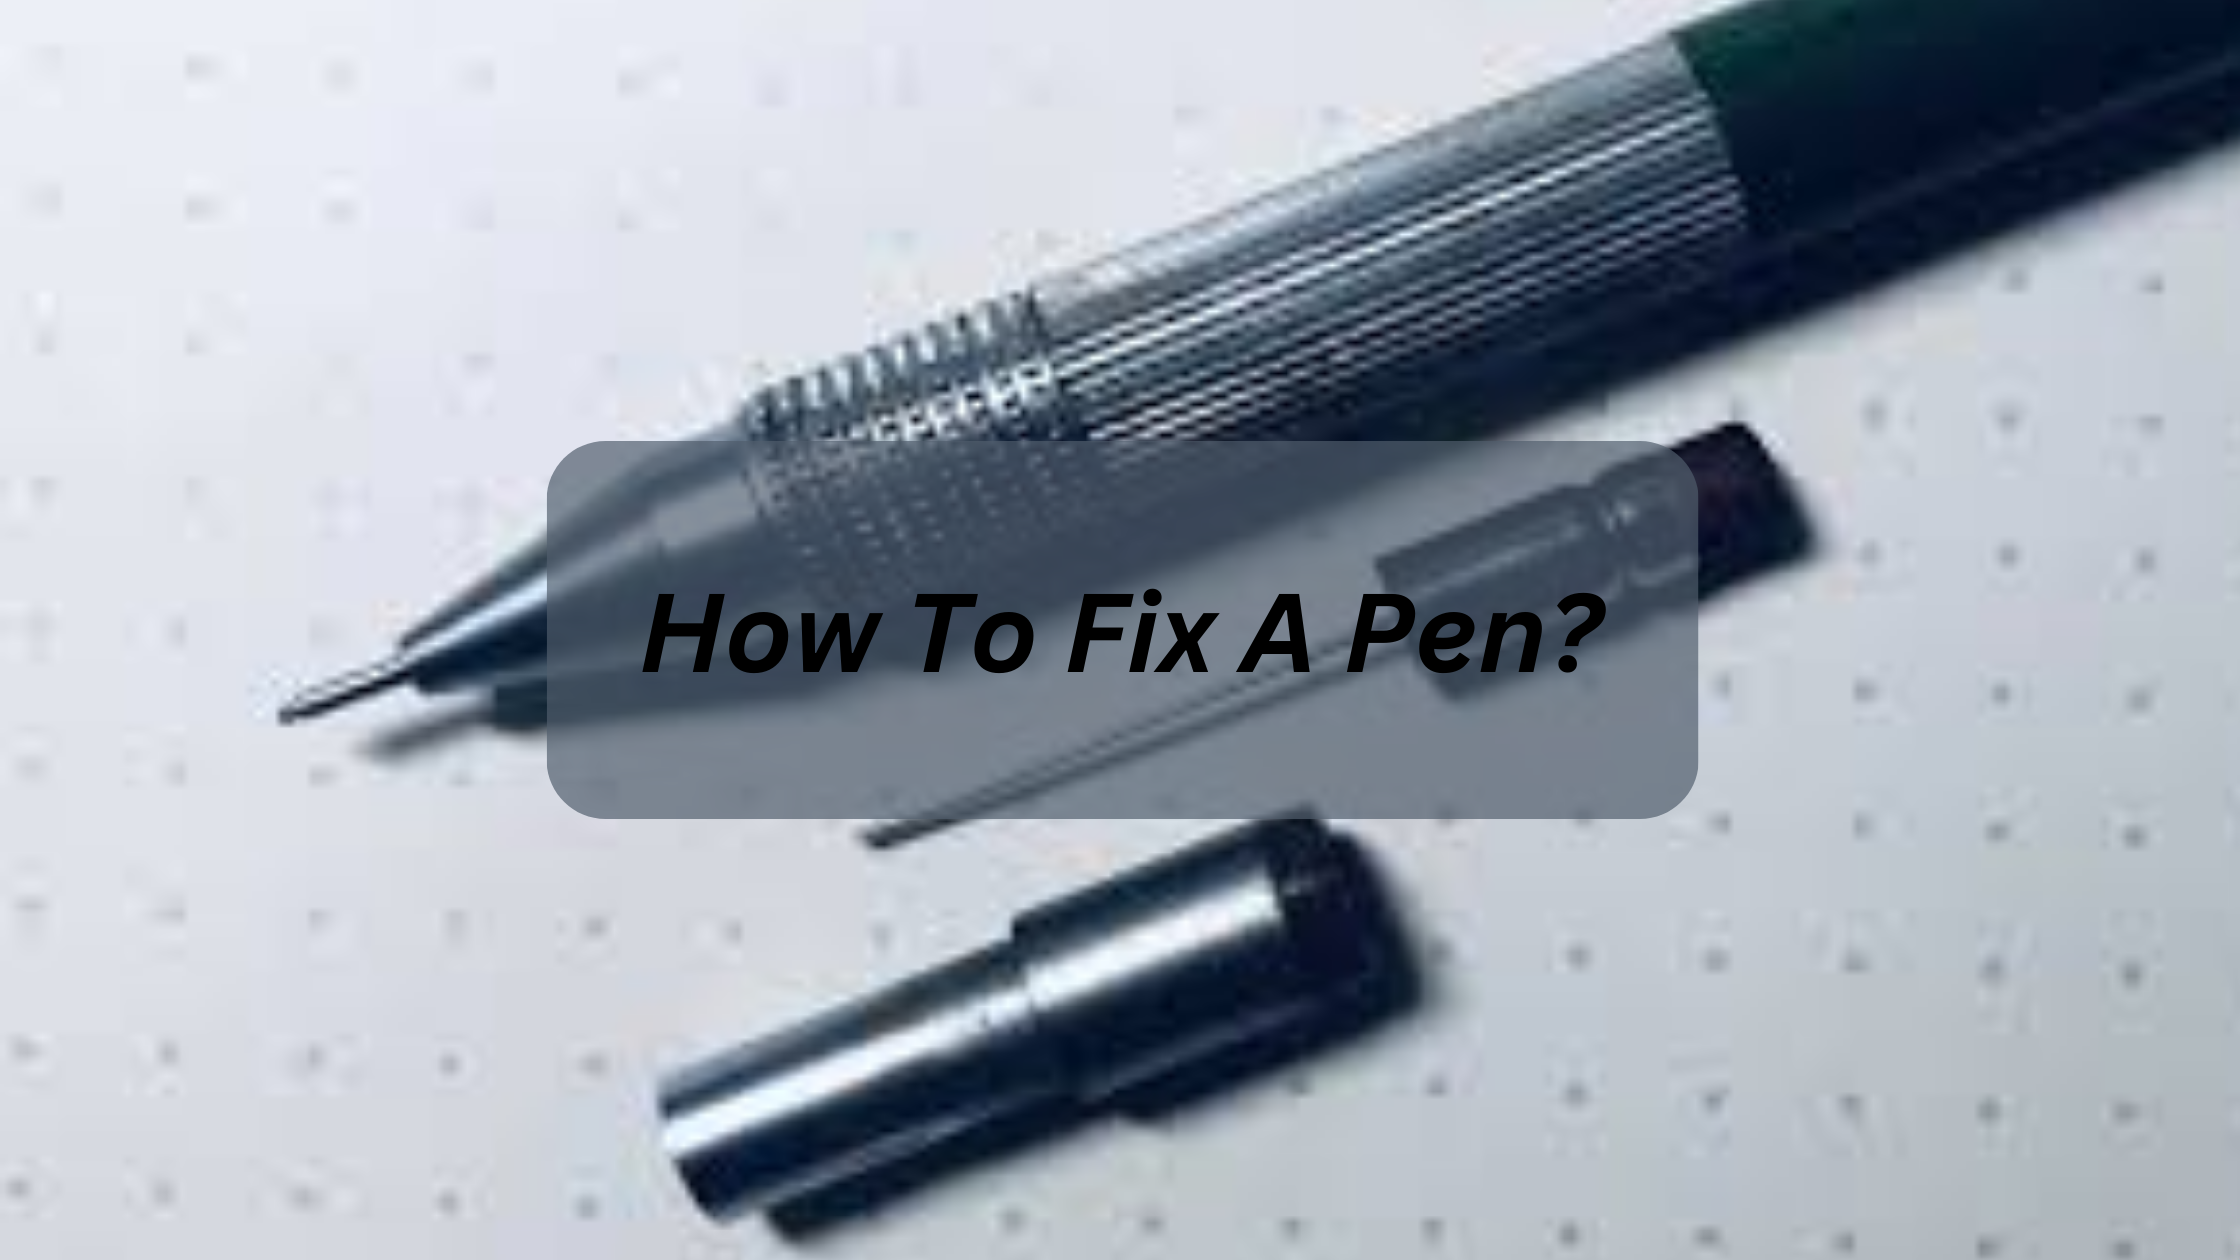 How To Fix A Pen?